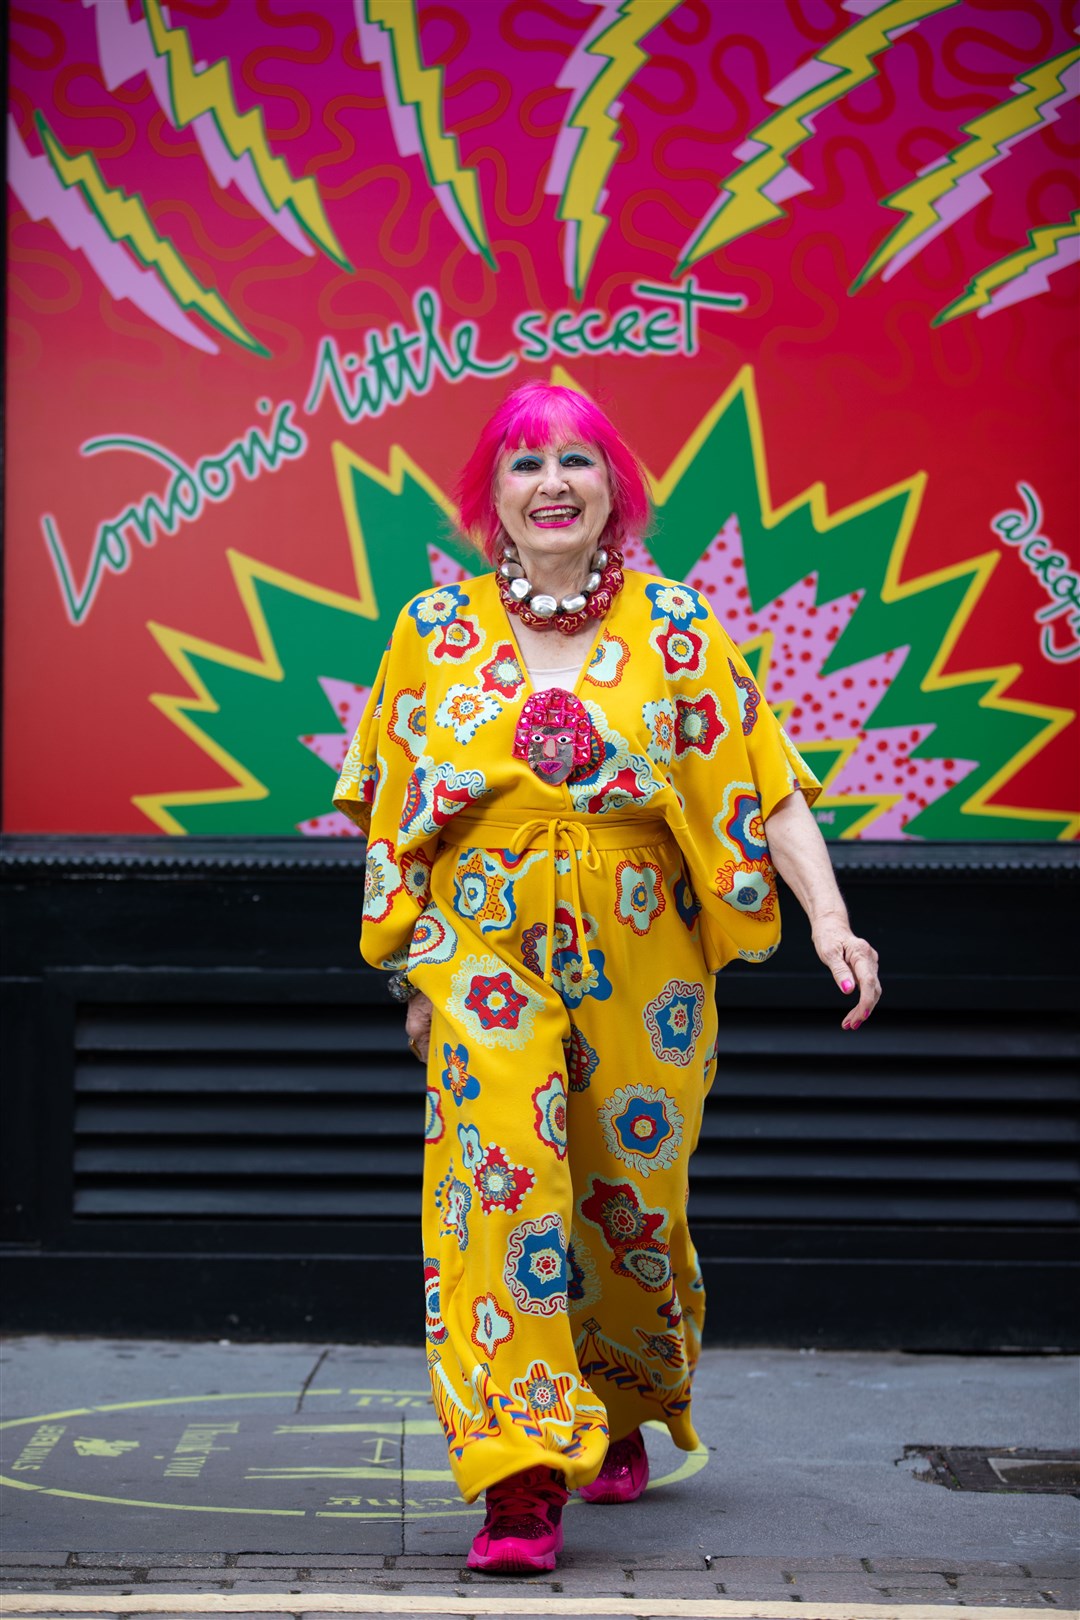 Zandra Rhodes said she hopes to bring an area of central London “back to life” with colourful installations of her art (David Parry/PA)